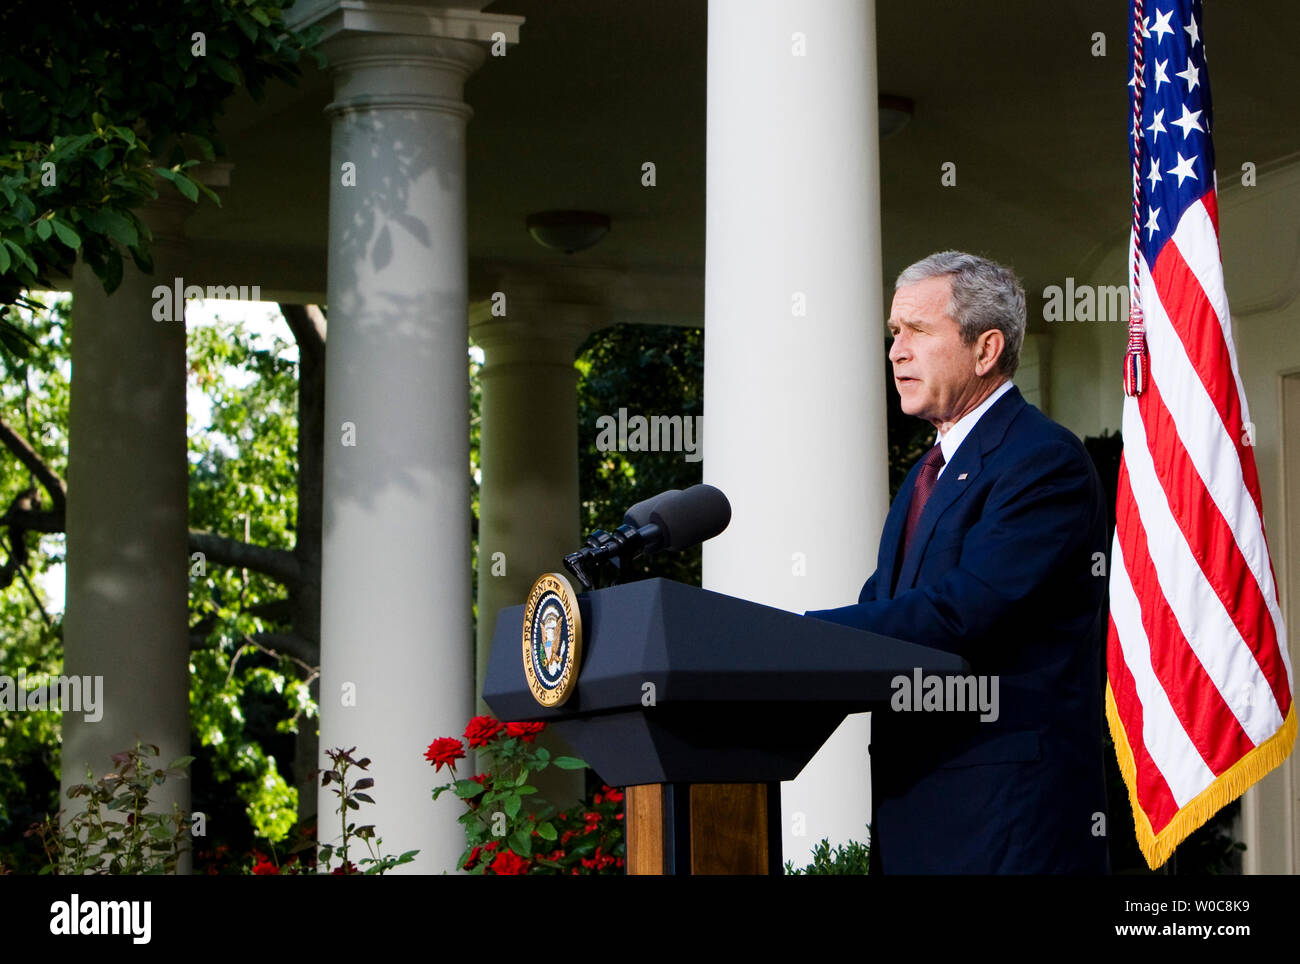 US President George W. Bush delivers remarks on the conflict between Georgia and Russia from the Rose Garden at the White House in Washington on August 11, 2008. Bush condemned the bombings by Russia in an escalation of the conflict over the South Ossetian region of Georgia. (UPI Photo/Patrick D. McDermott) Stock Photo